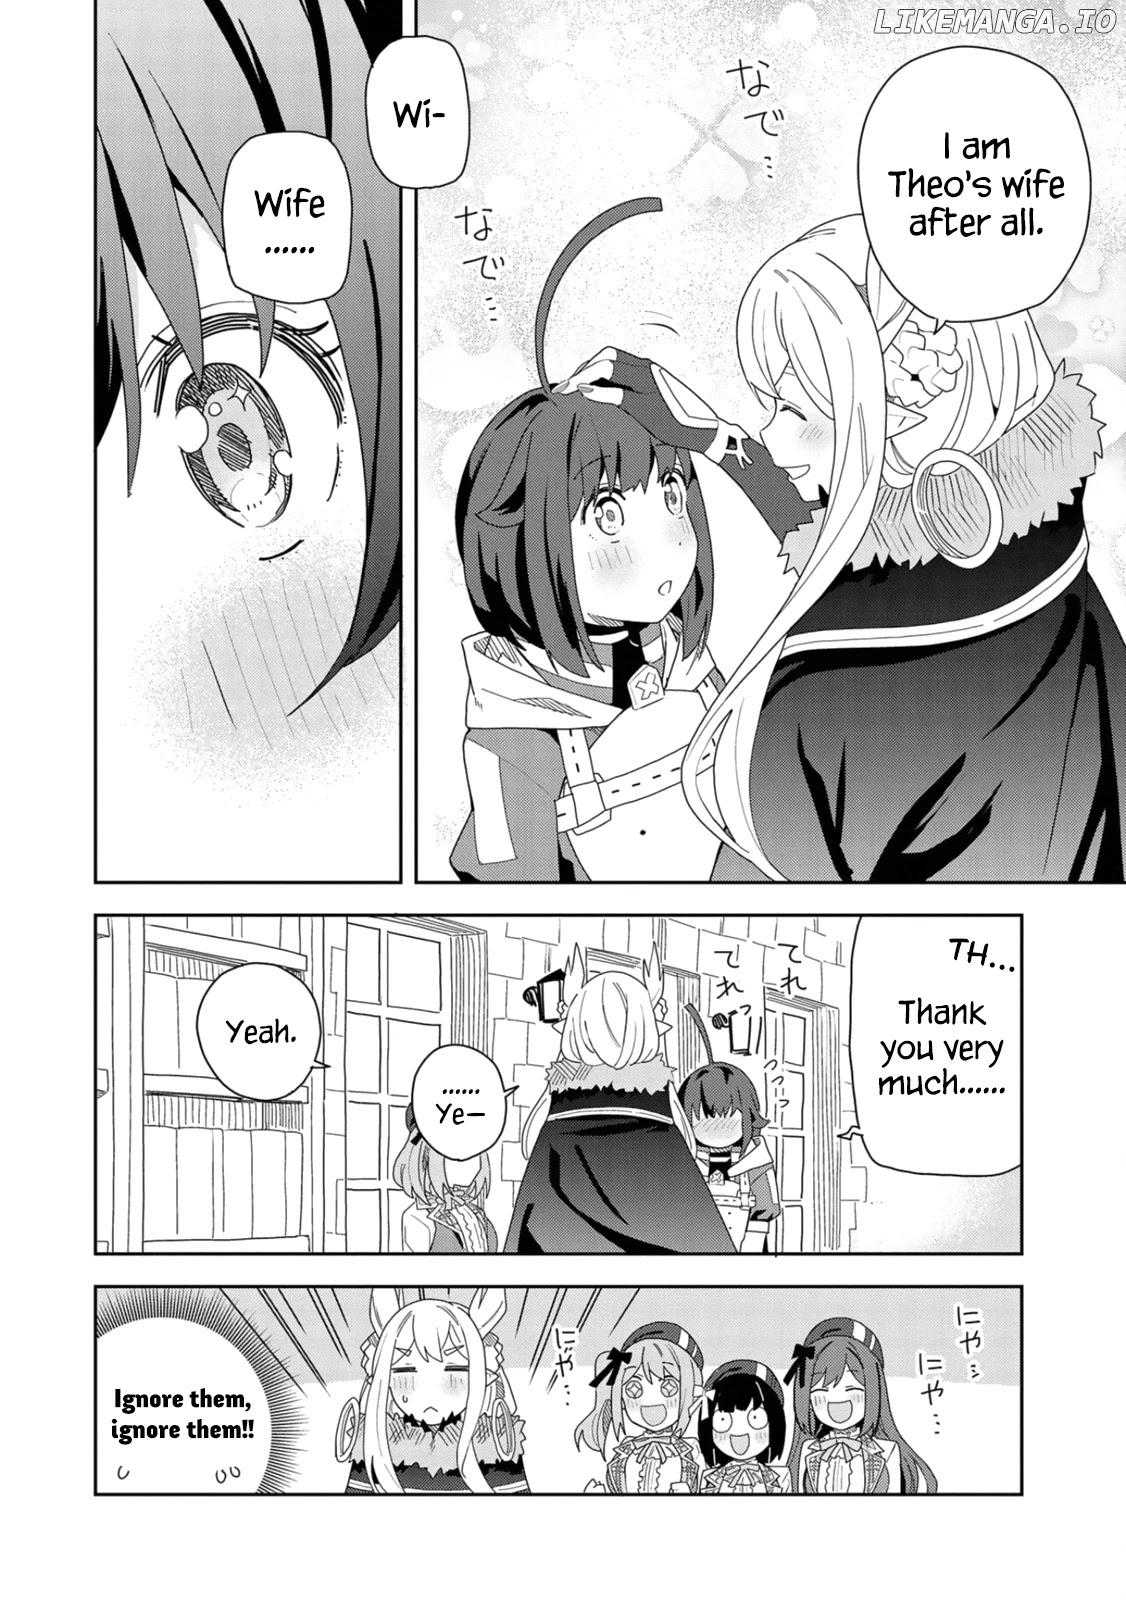 I Summoned The Devil To Grant Me a Wish, But I Married Her Instead Since She Was Adorable ~My New Devil Wife~ chapter 12 - page 10